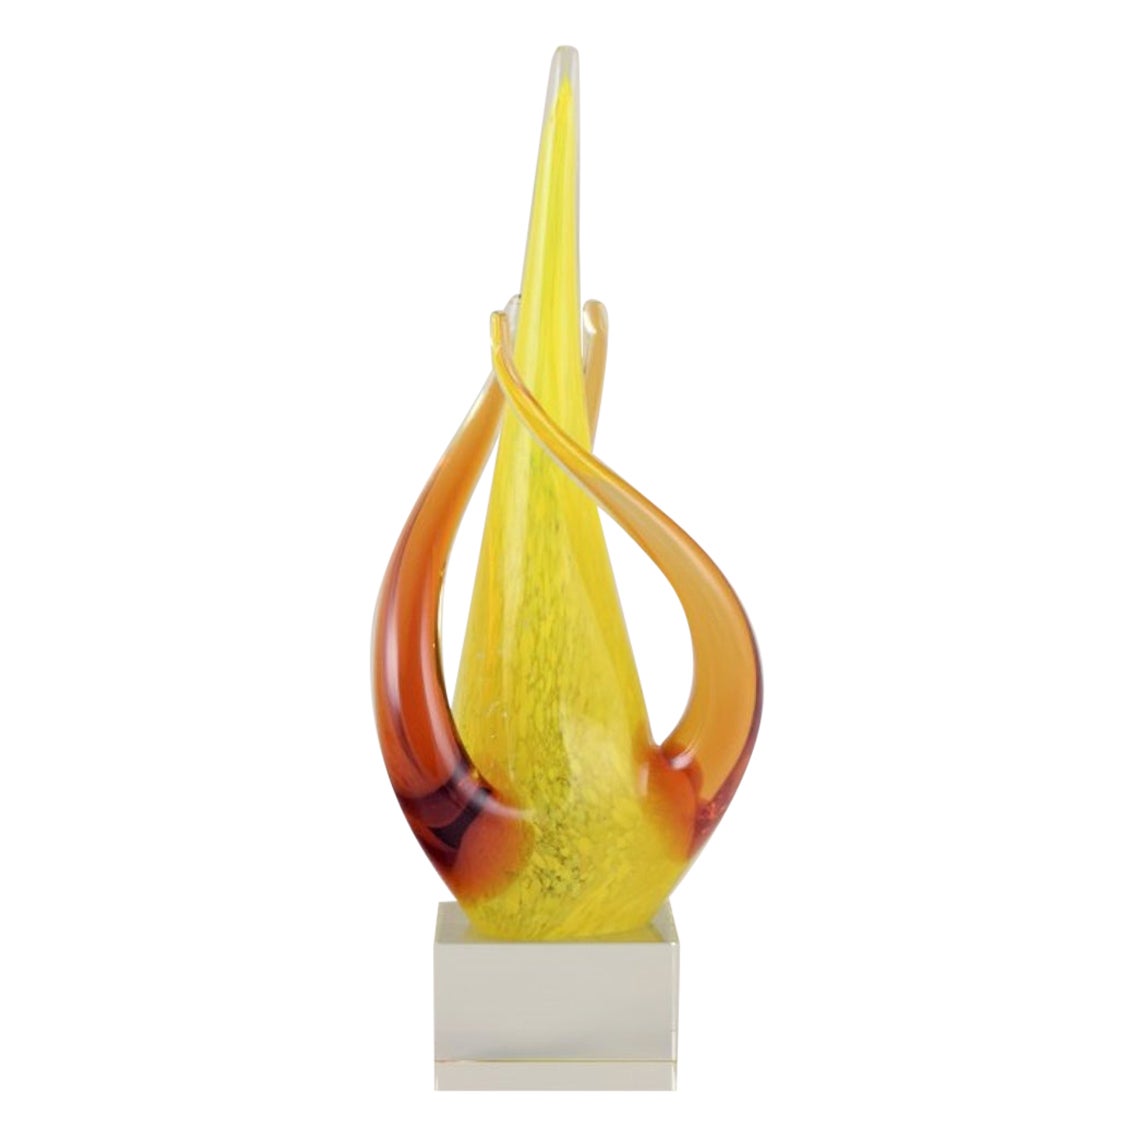 Swedish glass artist. Large sculpture in art glass. Yellow and amber decoration. For Sale